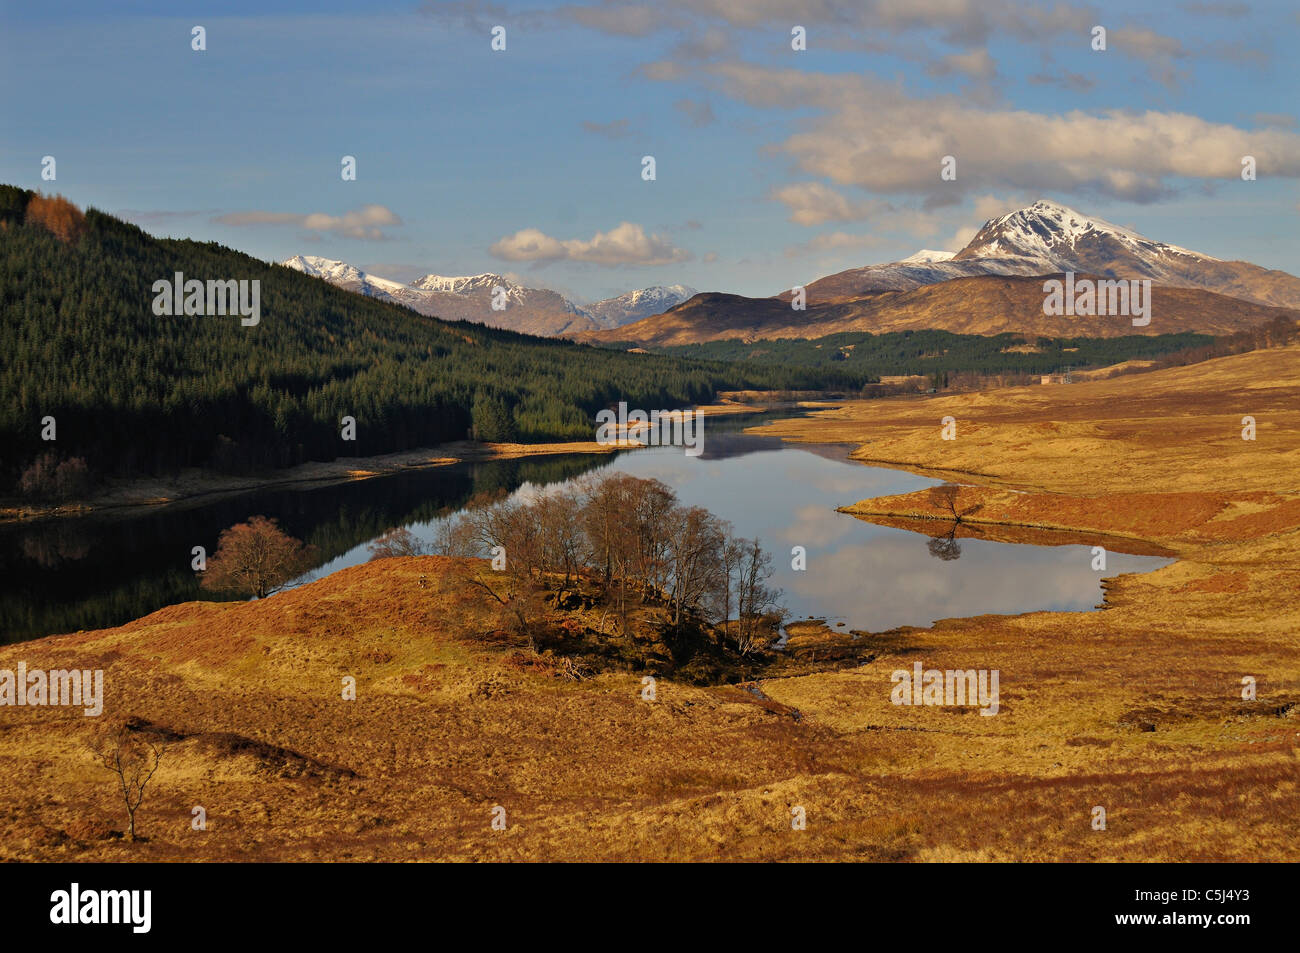 The broad River Garry, flanked by trees and with hills and snow-capped mountains behind, Glen Garry, western Scotland, UK. Stock Photo